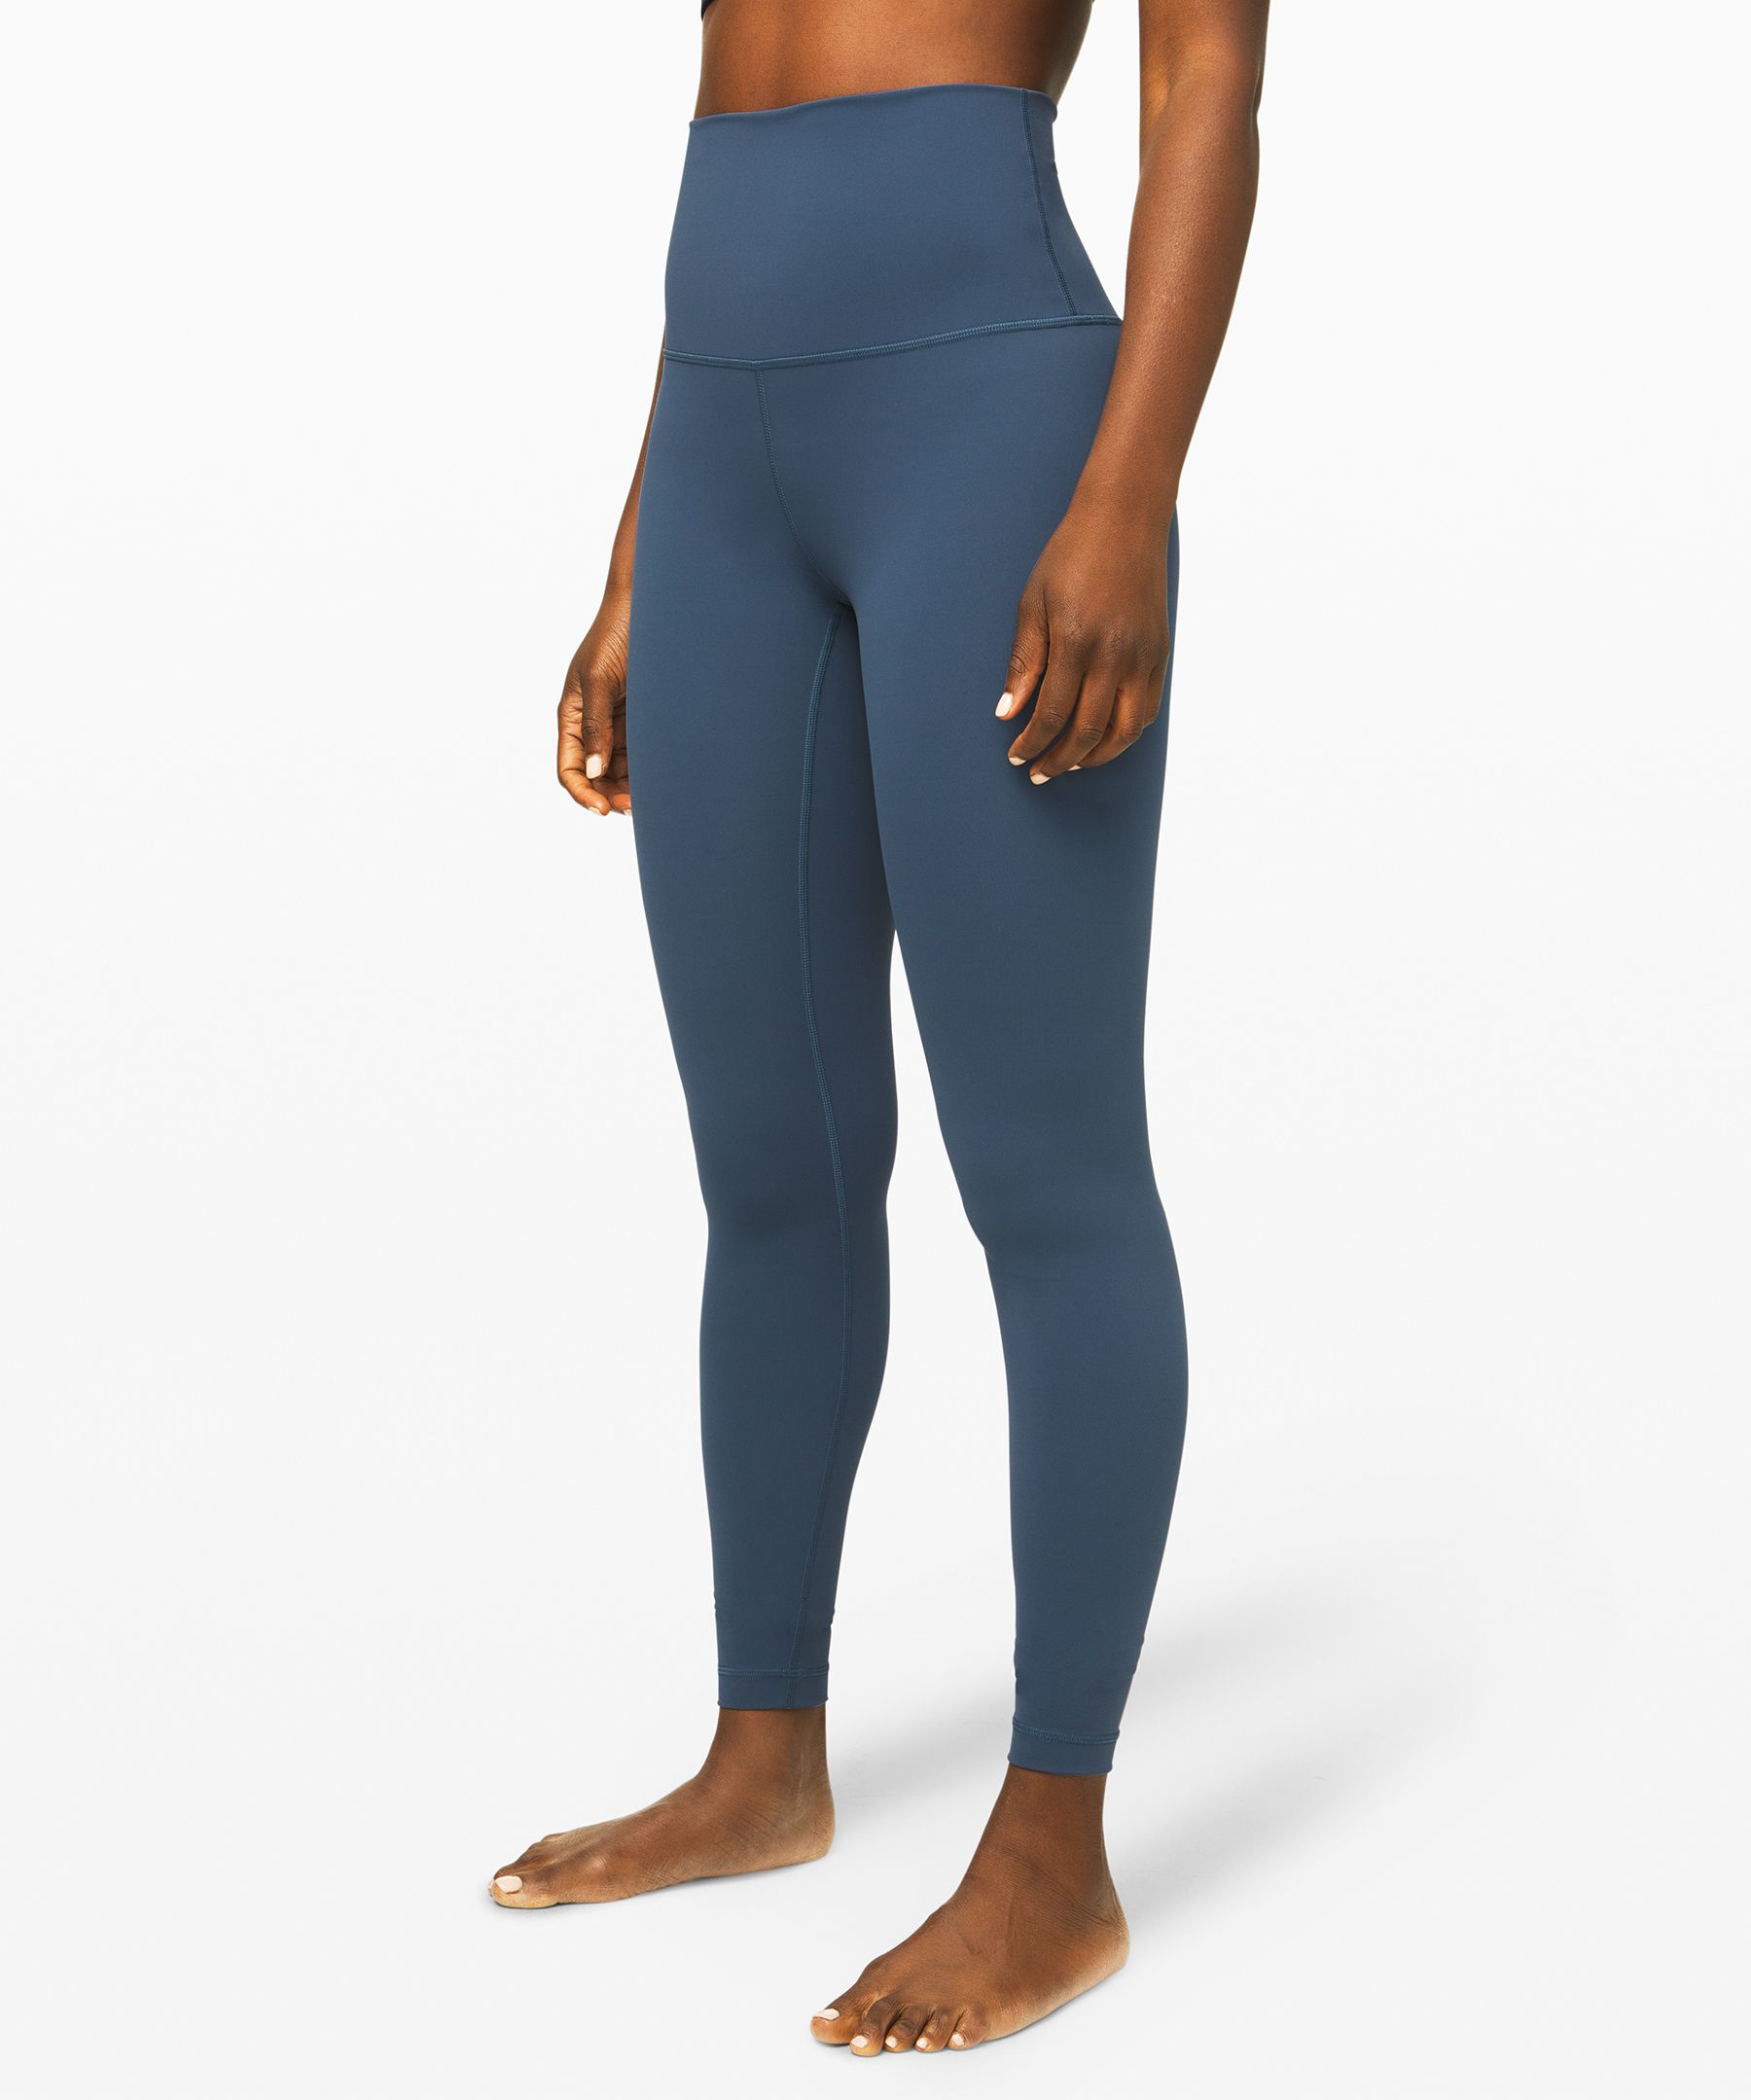 Lululemon Wunder Under Super High-rise Tight *full-on Luxtreme Online Only 28" In Code Blue